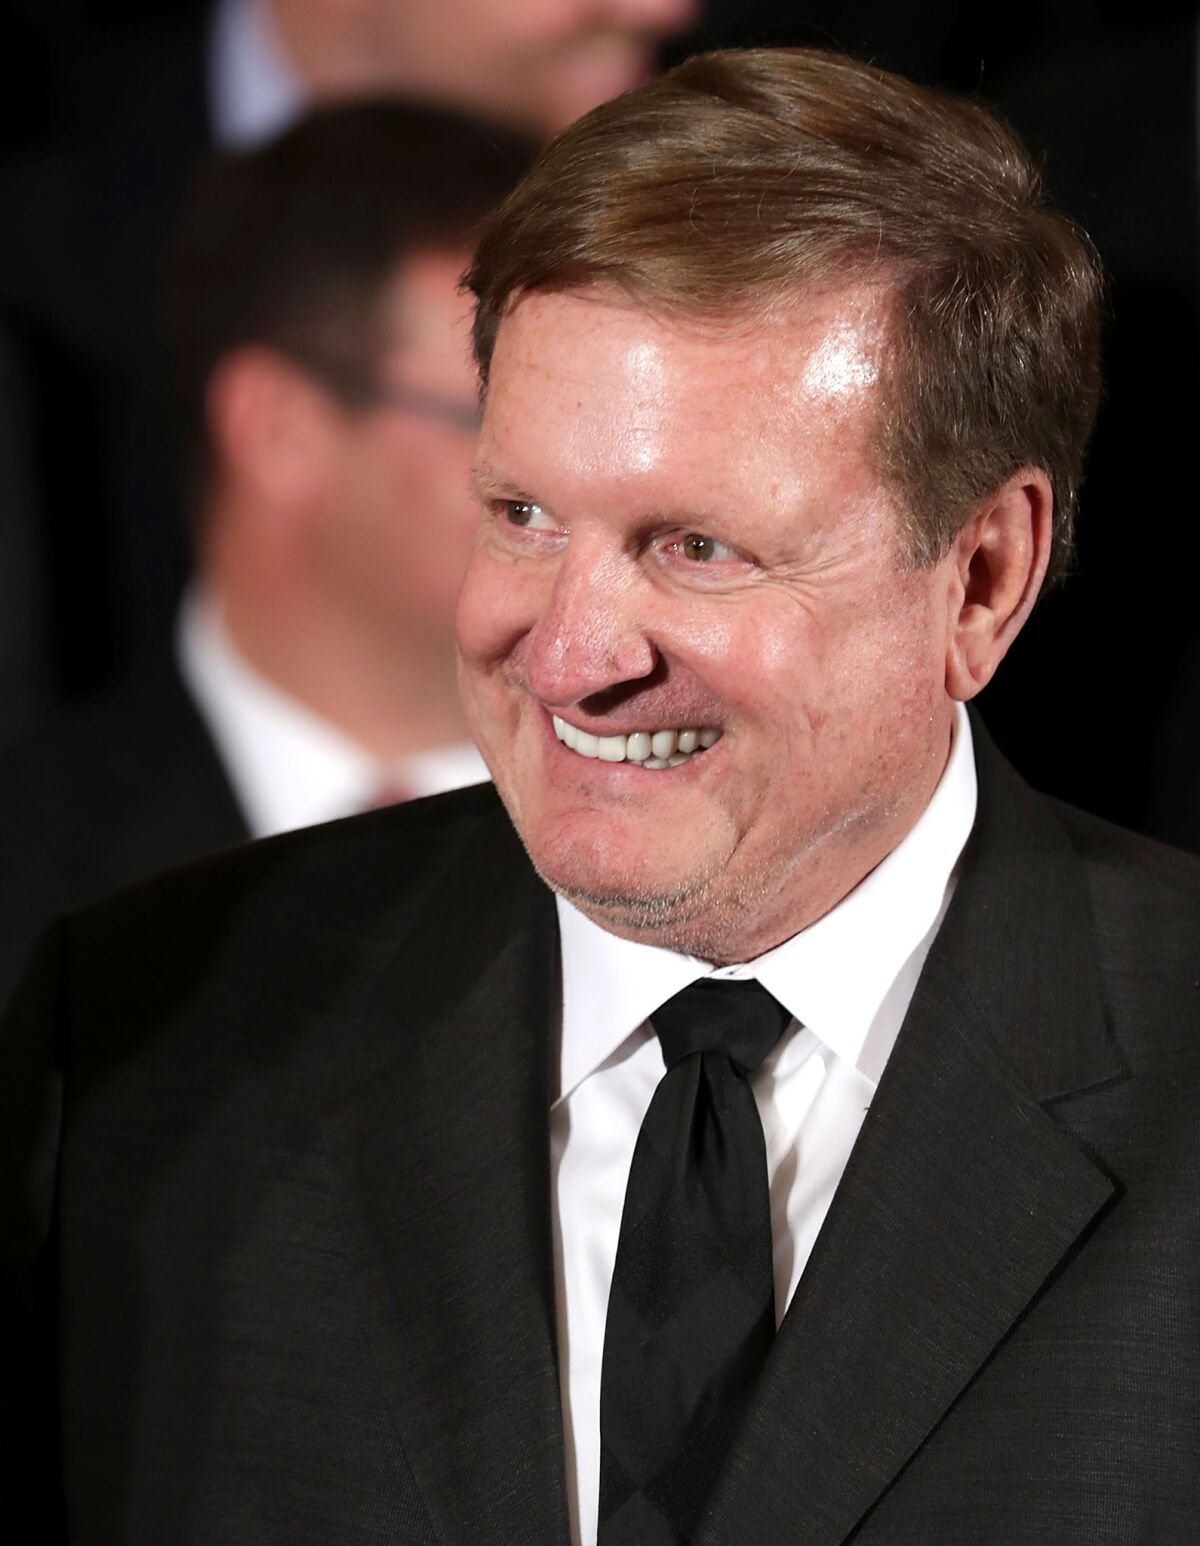 Venture capitalist Ron Burkle is having the Hope house redone to reflect the architect’s original vision. (Chip Somodevilla / Getty Images)